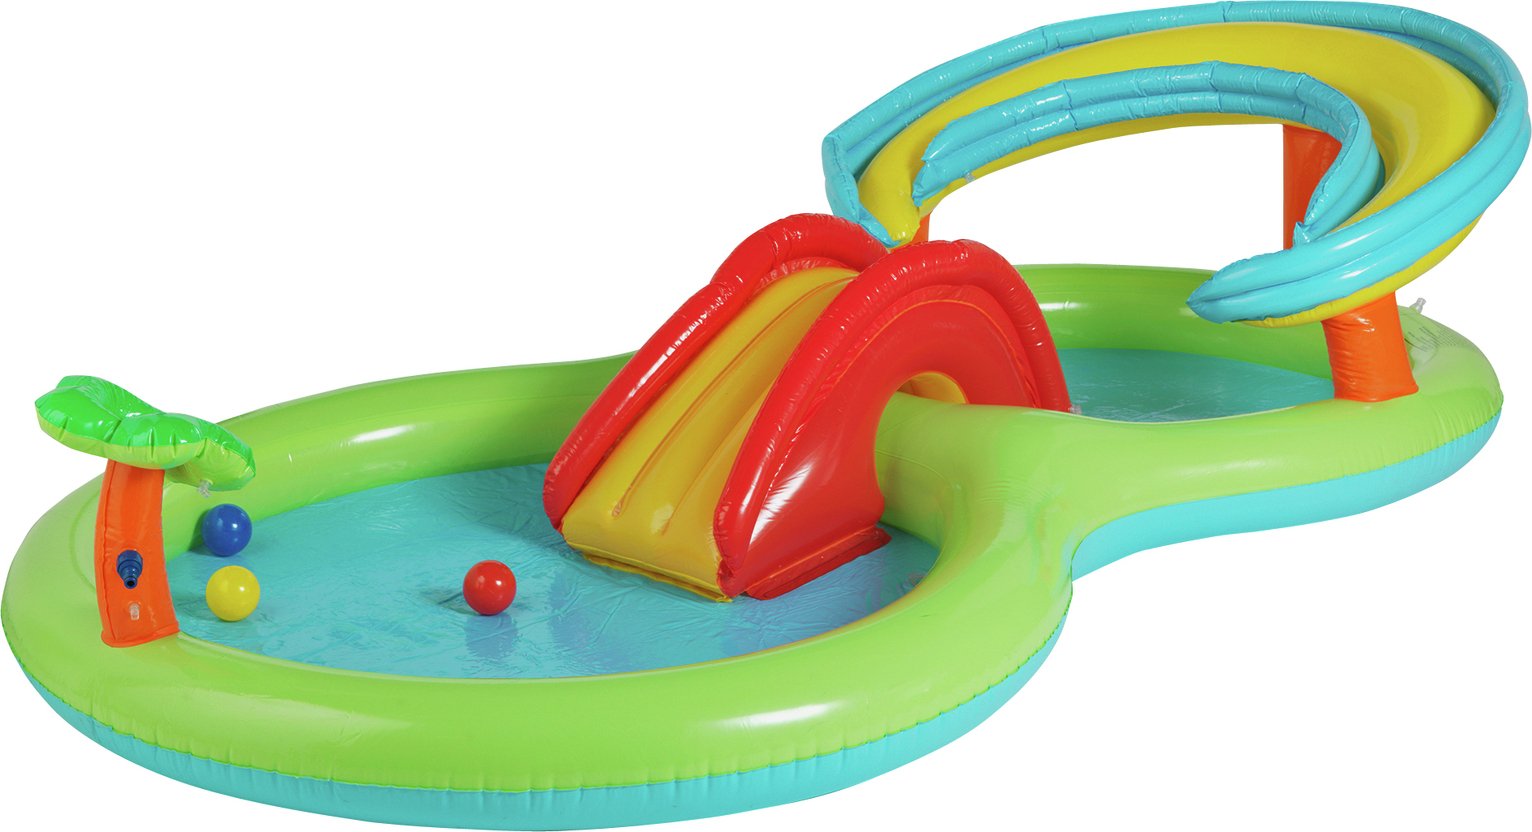 Chad Valley 8.5ft Activity Play Centre Paddling Pool review